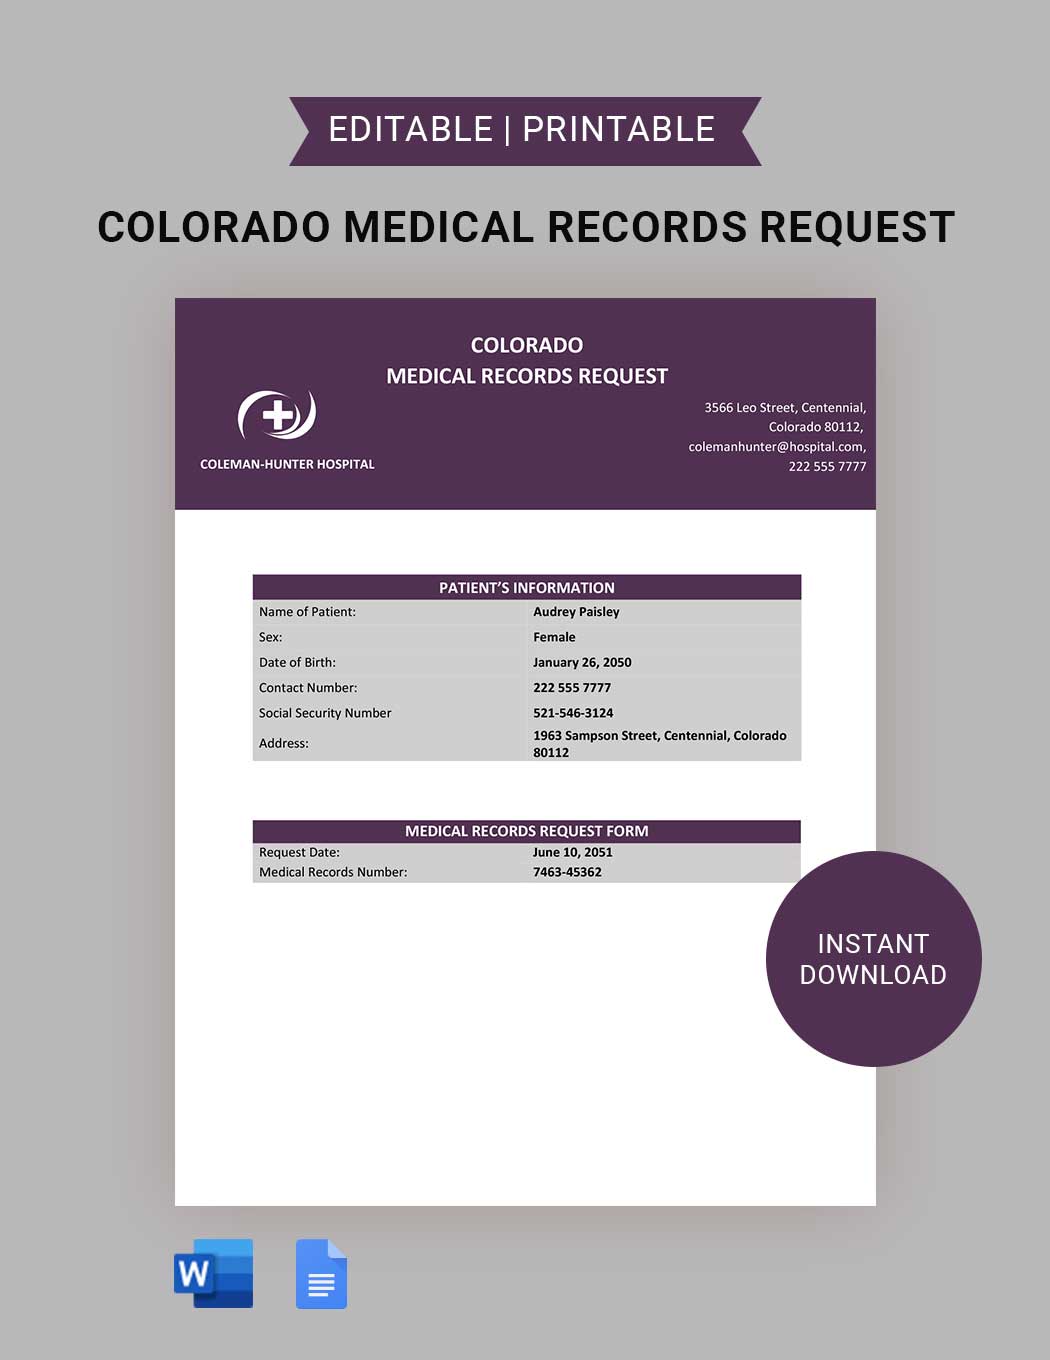 Colorado Medical Records Request Template in Word, Google Docs